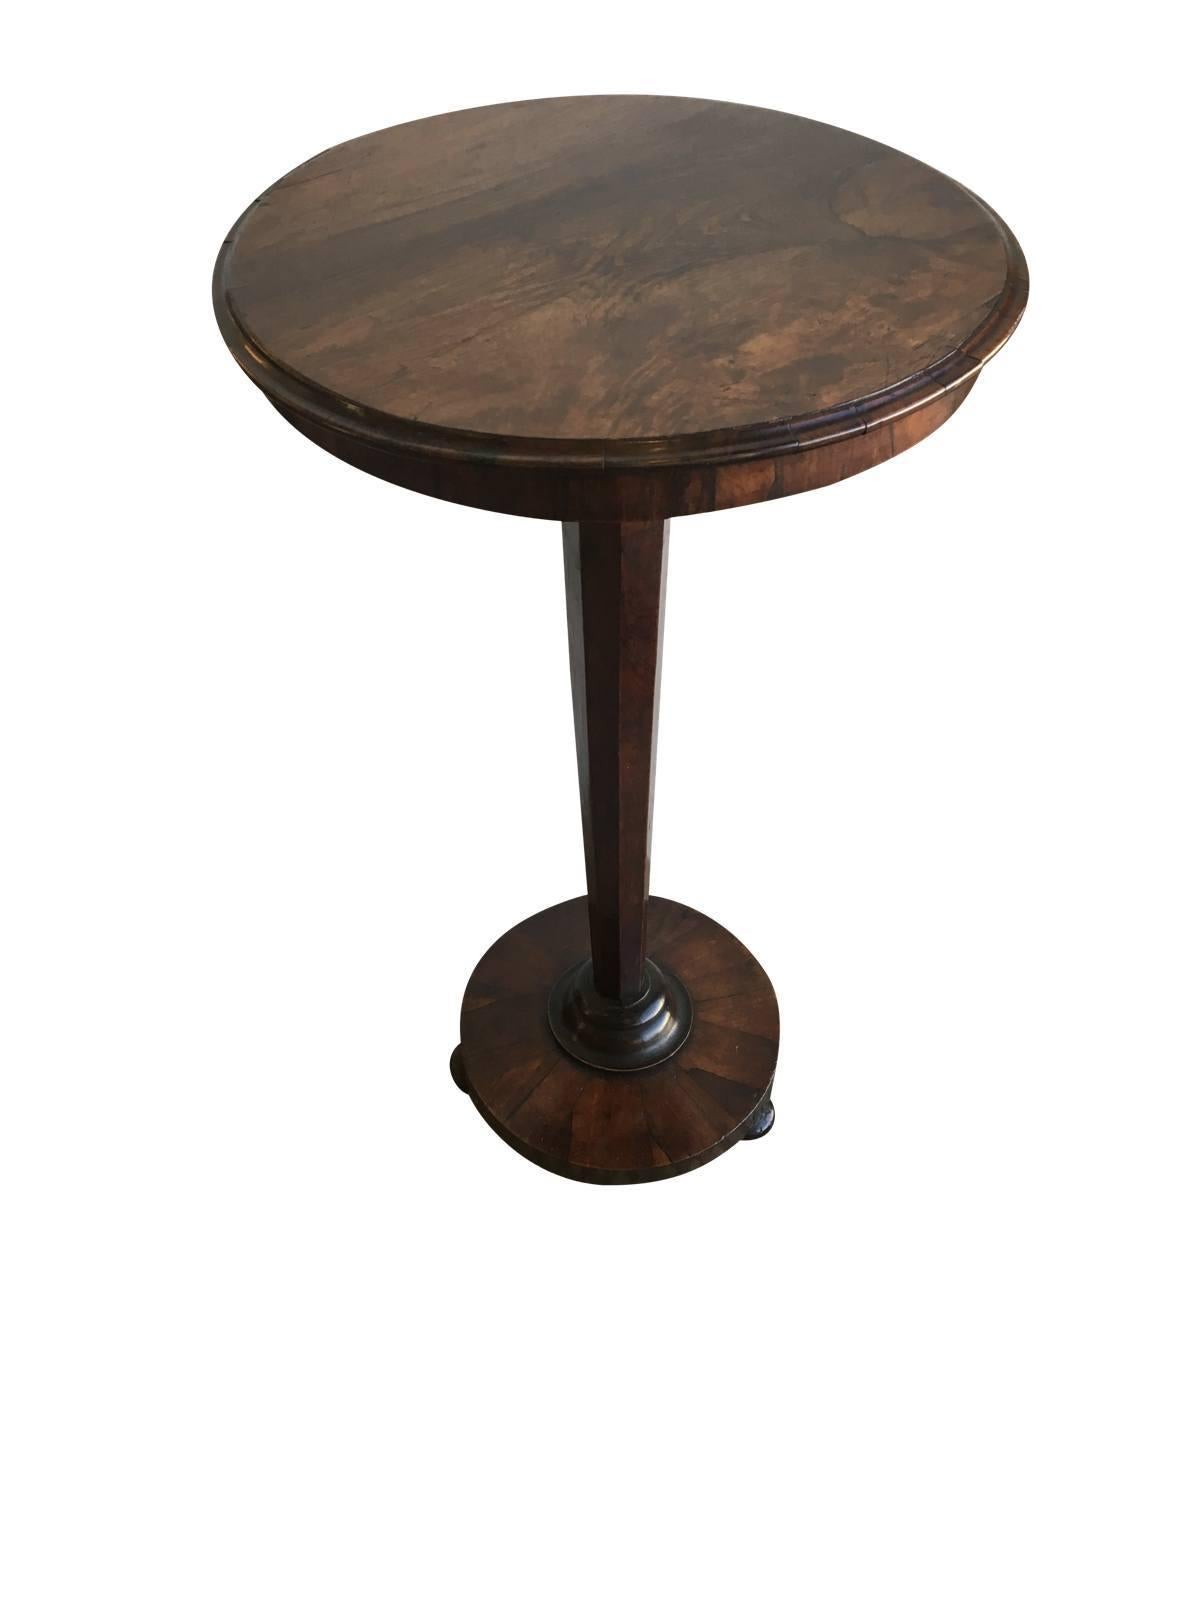 An elegant sculptural 19th century Secessionist or Biedermeier side table (drinks table). Mahogany.